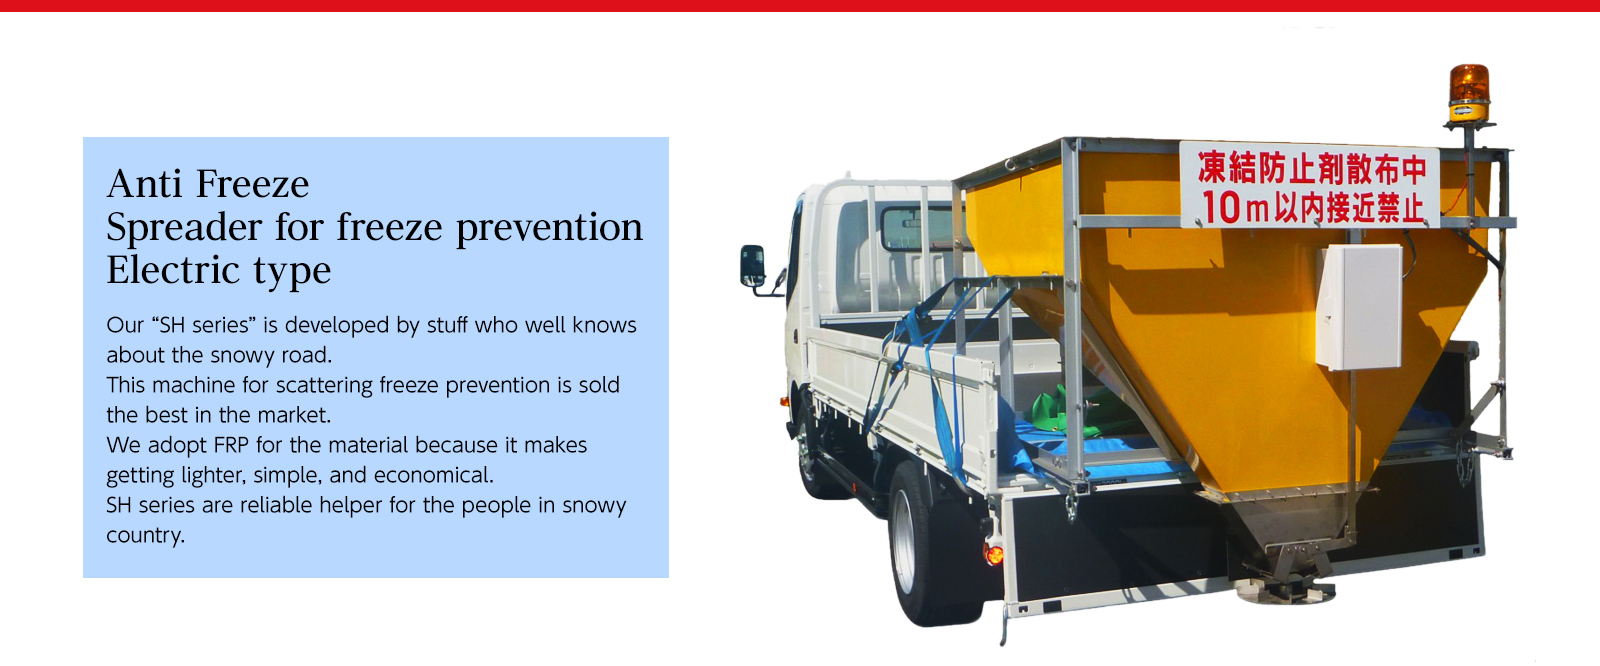 Anti Freeze Spreader for freeze prevention Electric type